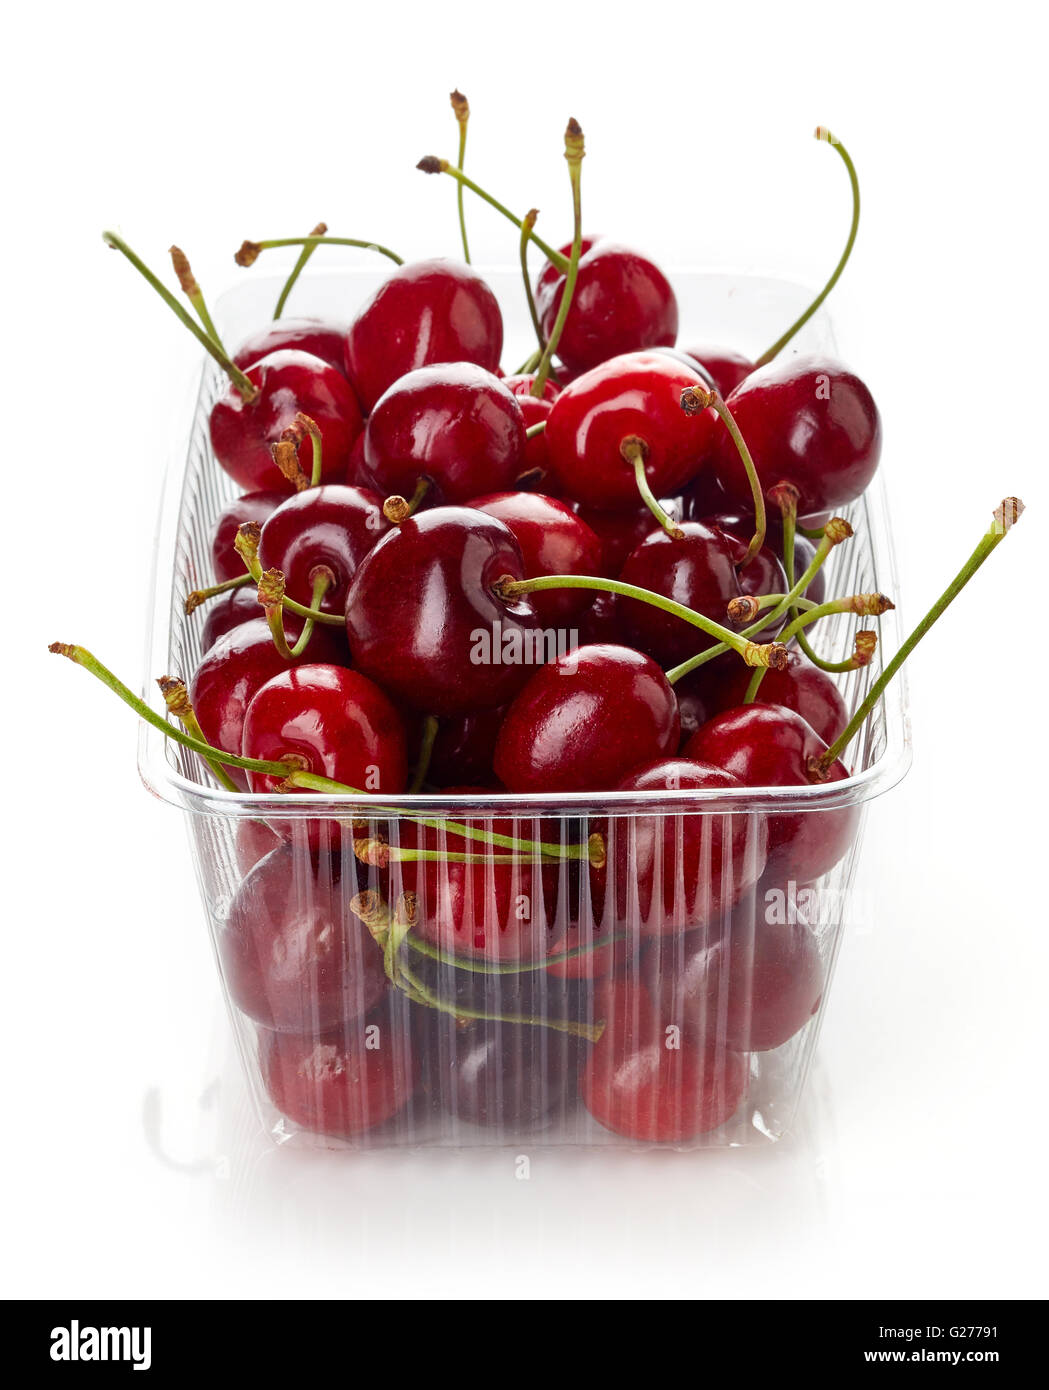 cherry in plastic transparent container box, isolated on white background Stock Photo